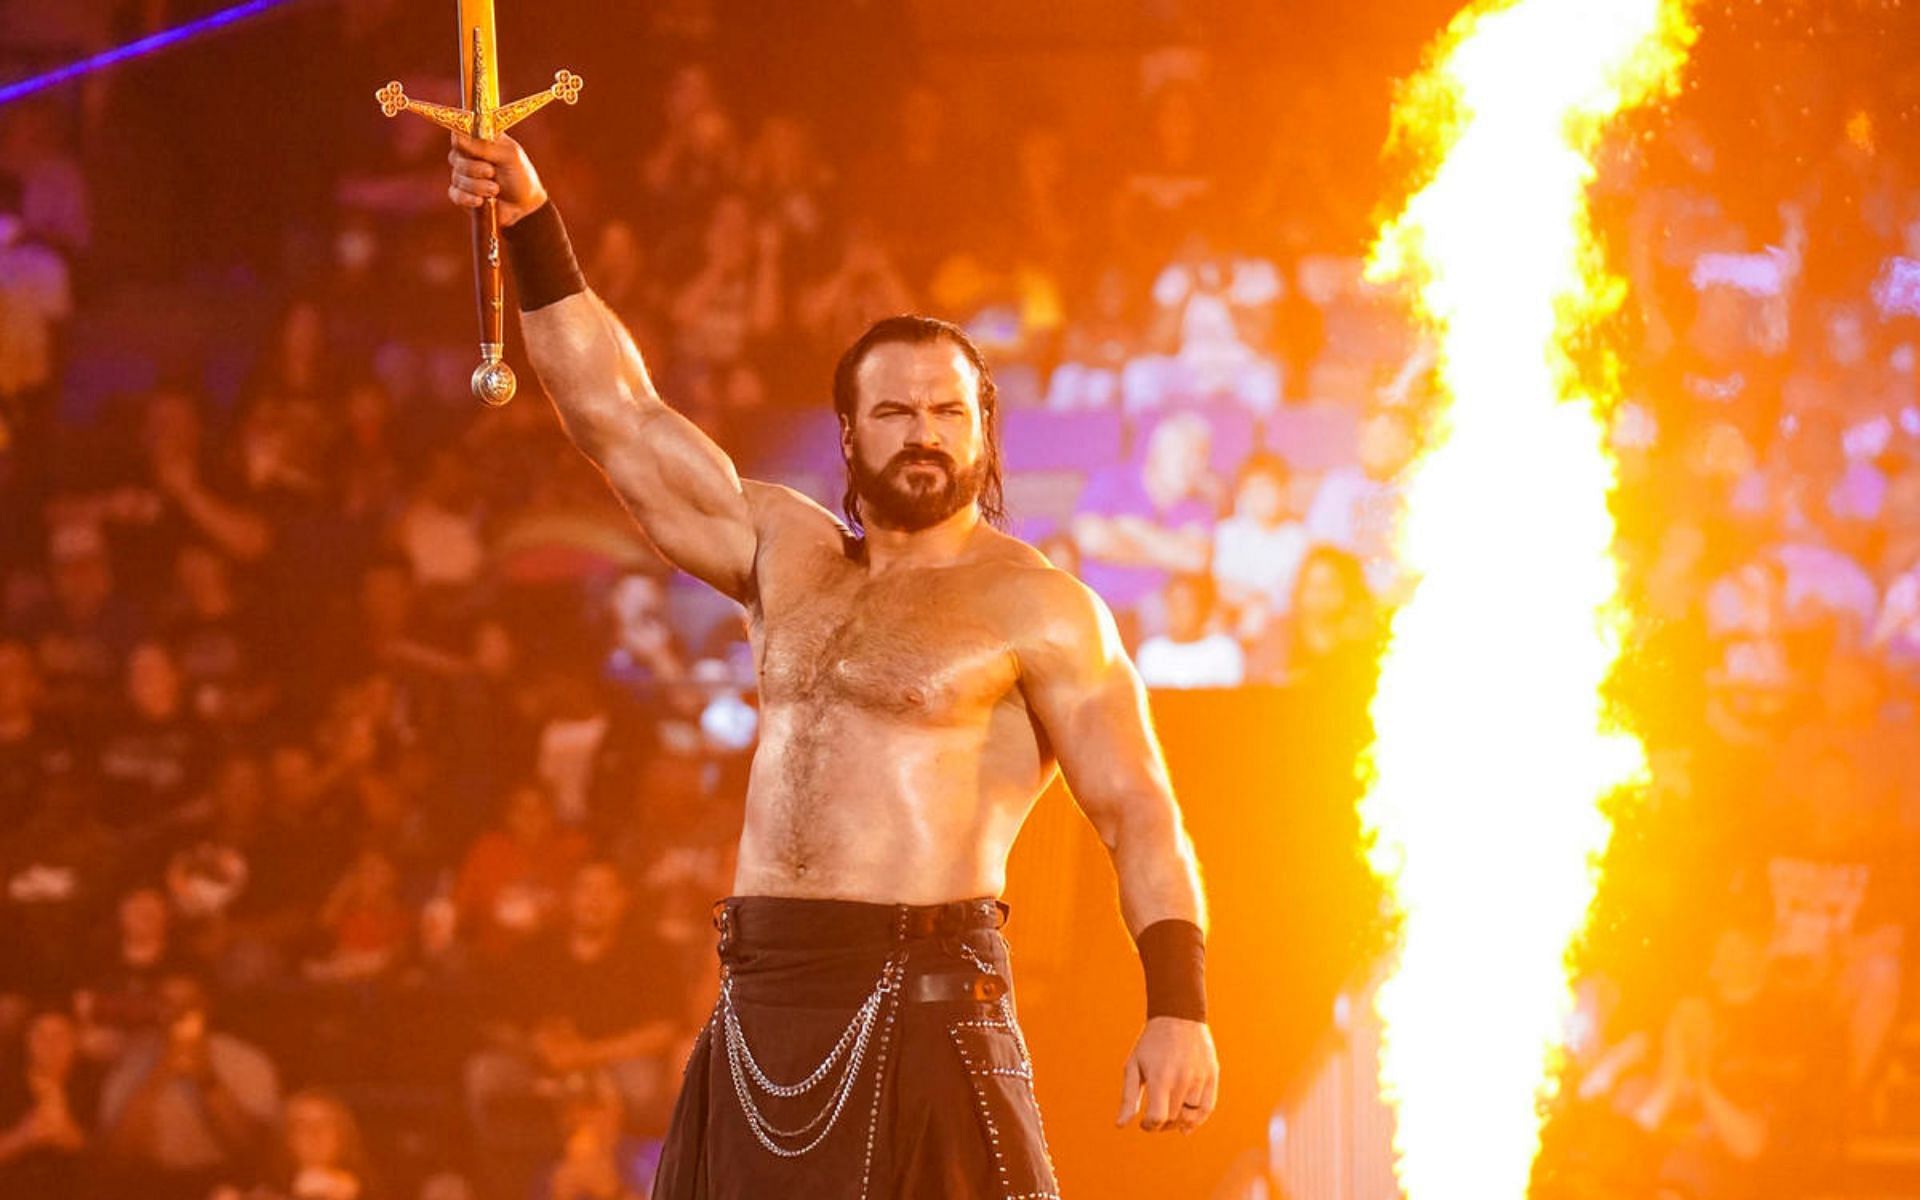 The Scottish Warrior during his entrance on SmackDown!